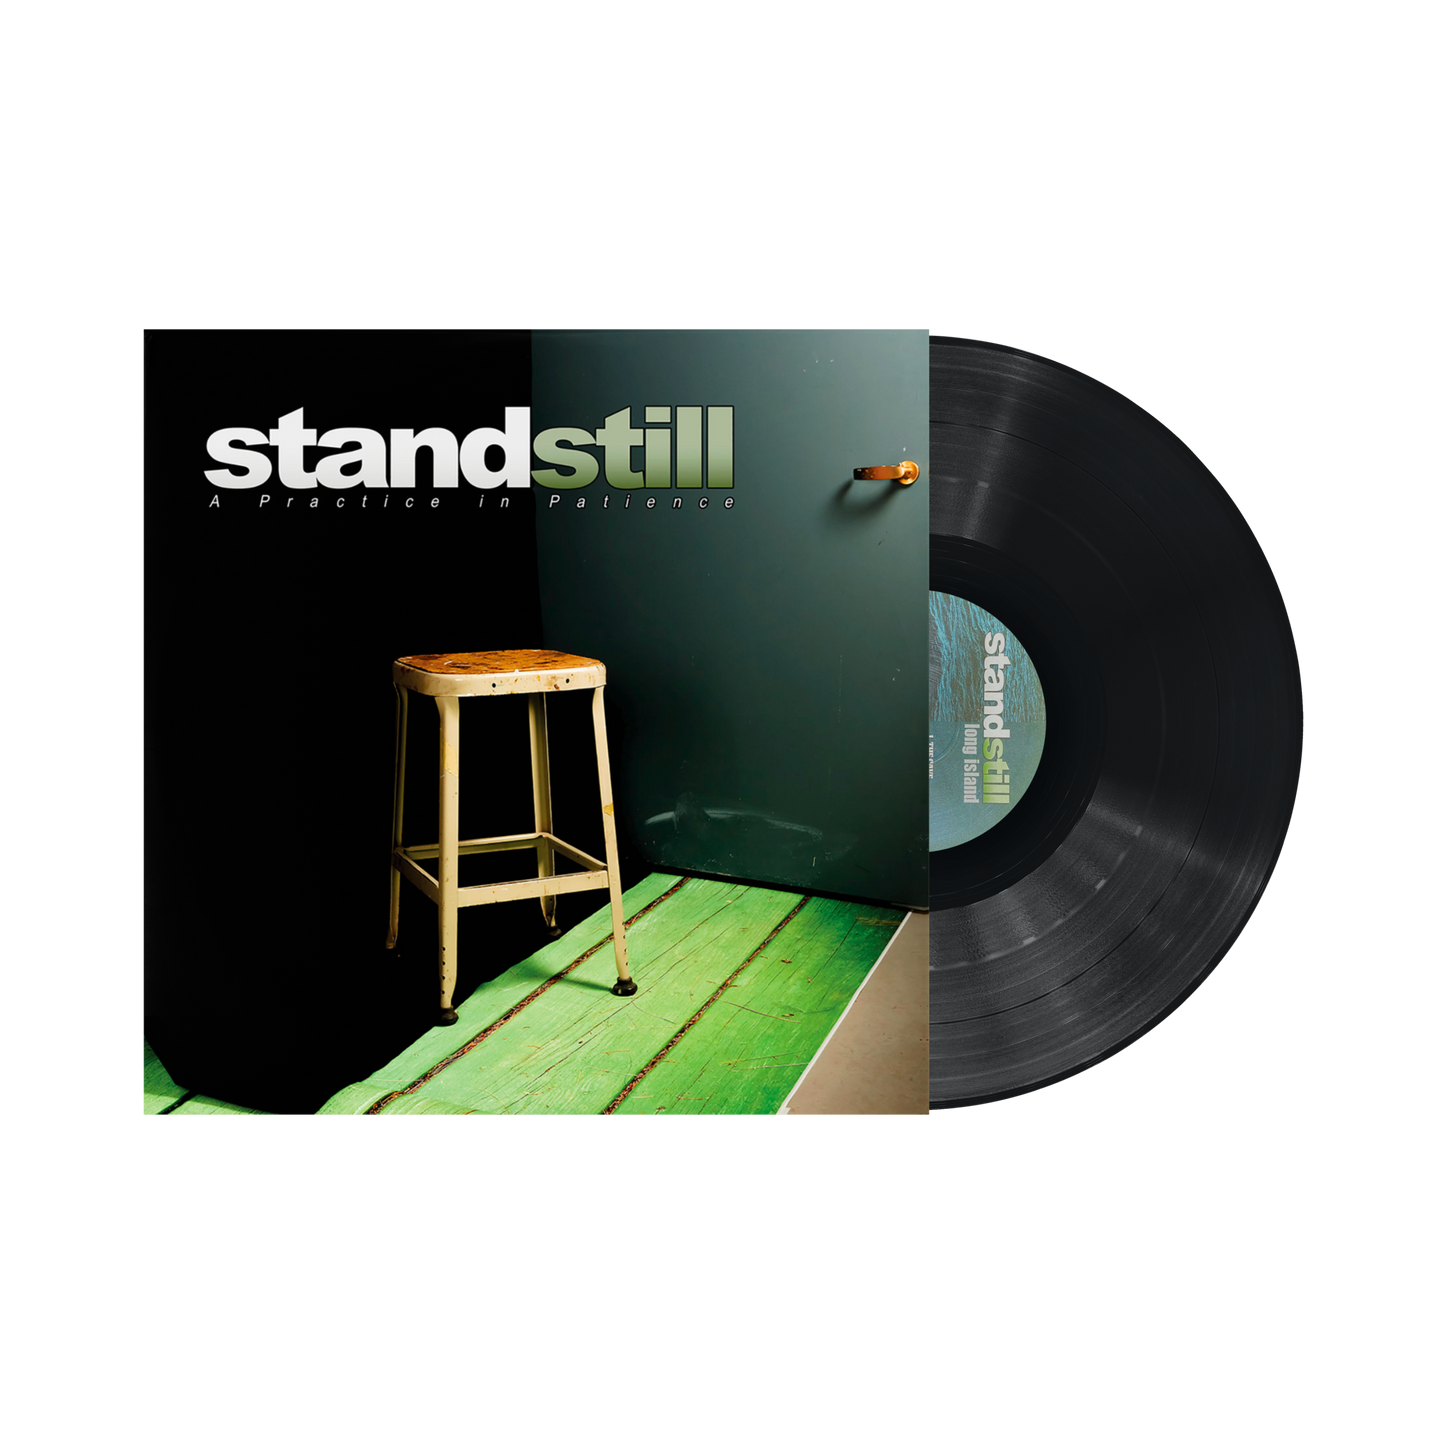 Stand Still "A Practice In Patience" LP